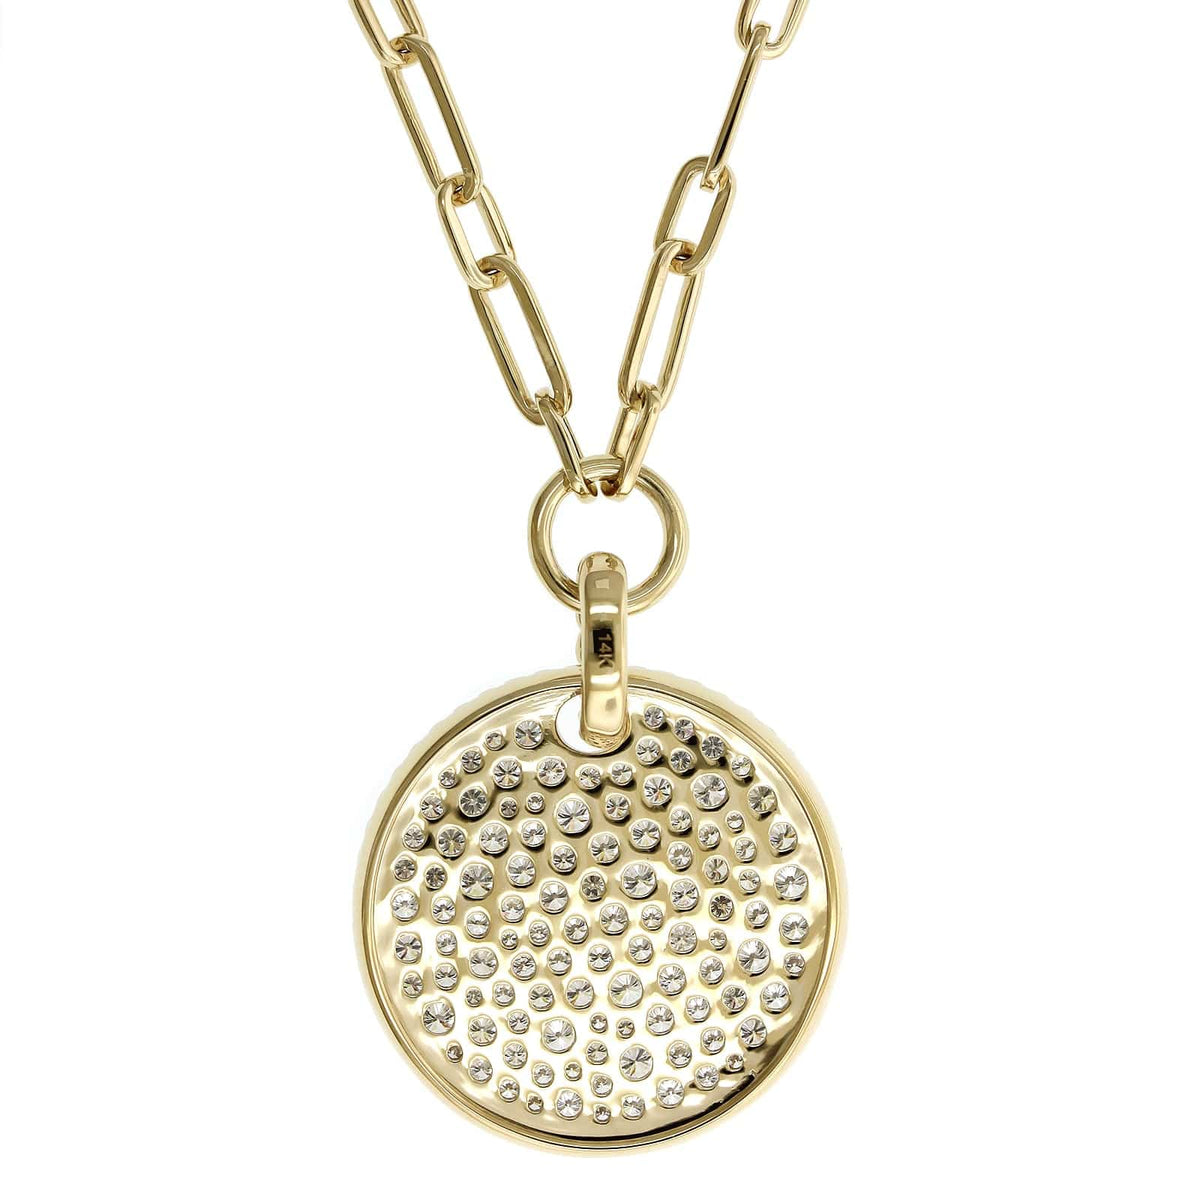 14K Yellow Gold Pave Diamond Disc Paperclip Necklace